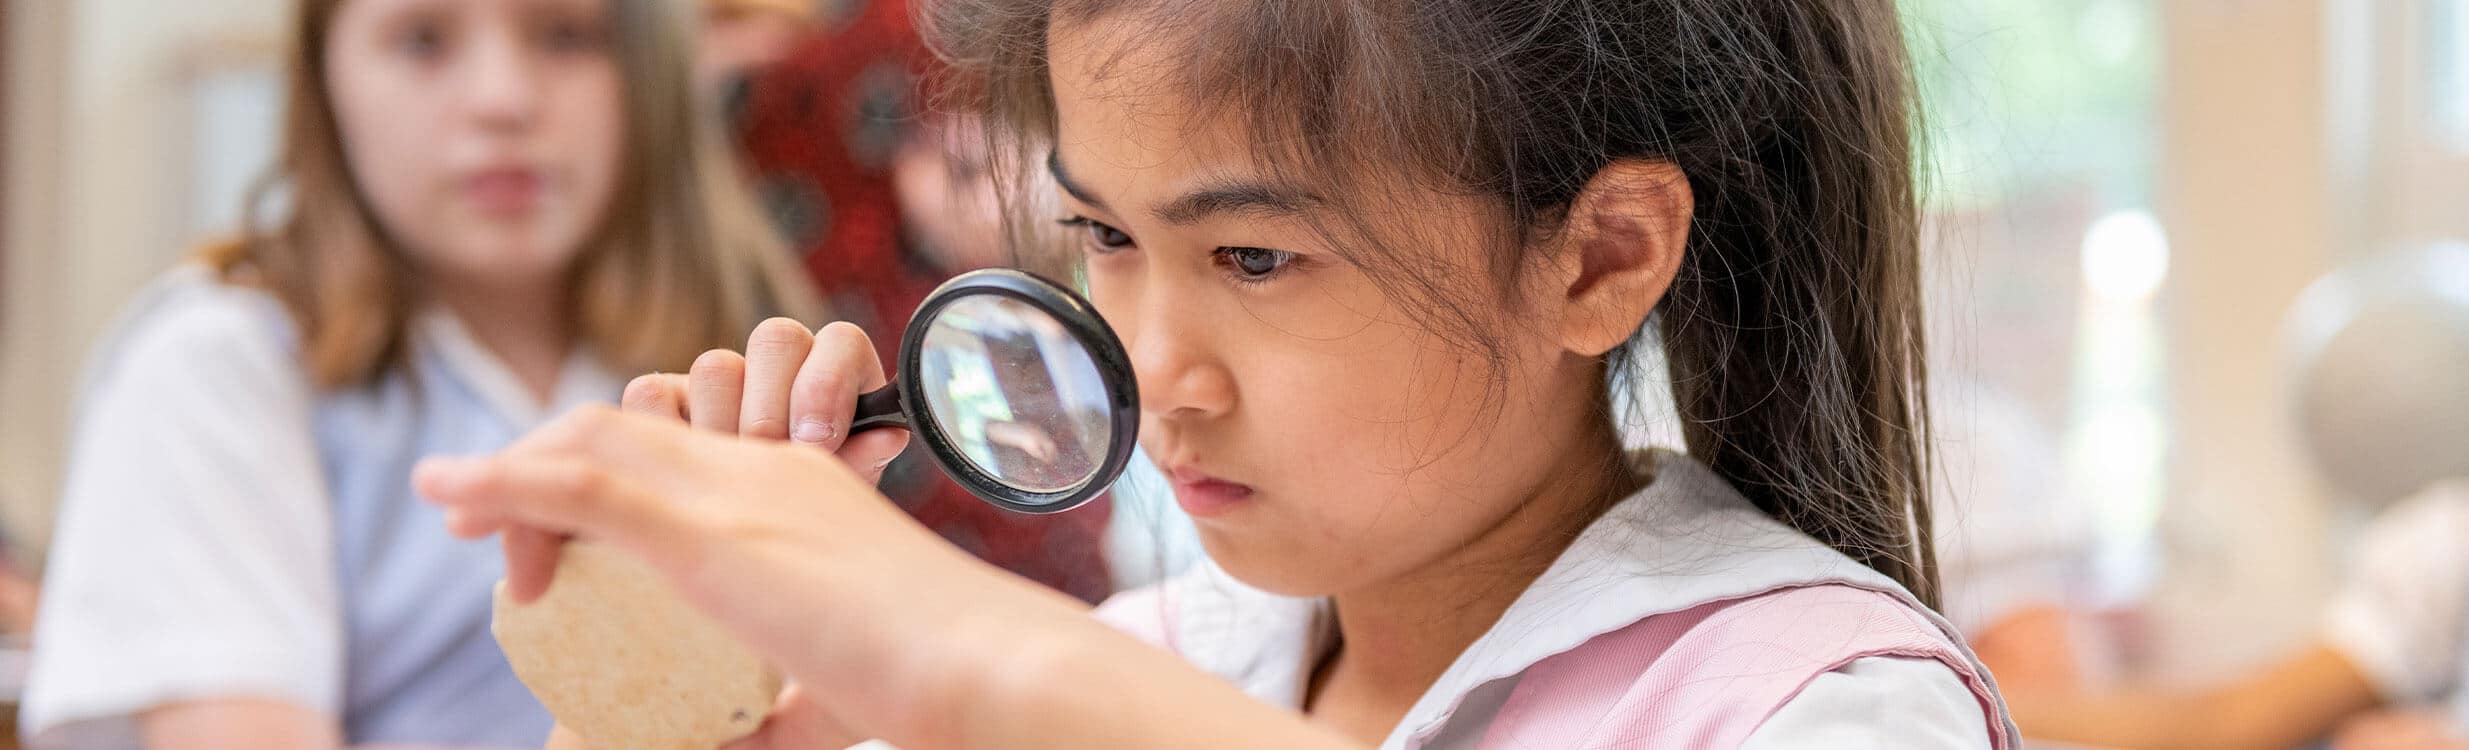 Lower School student in science glass looking through magnifying glass